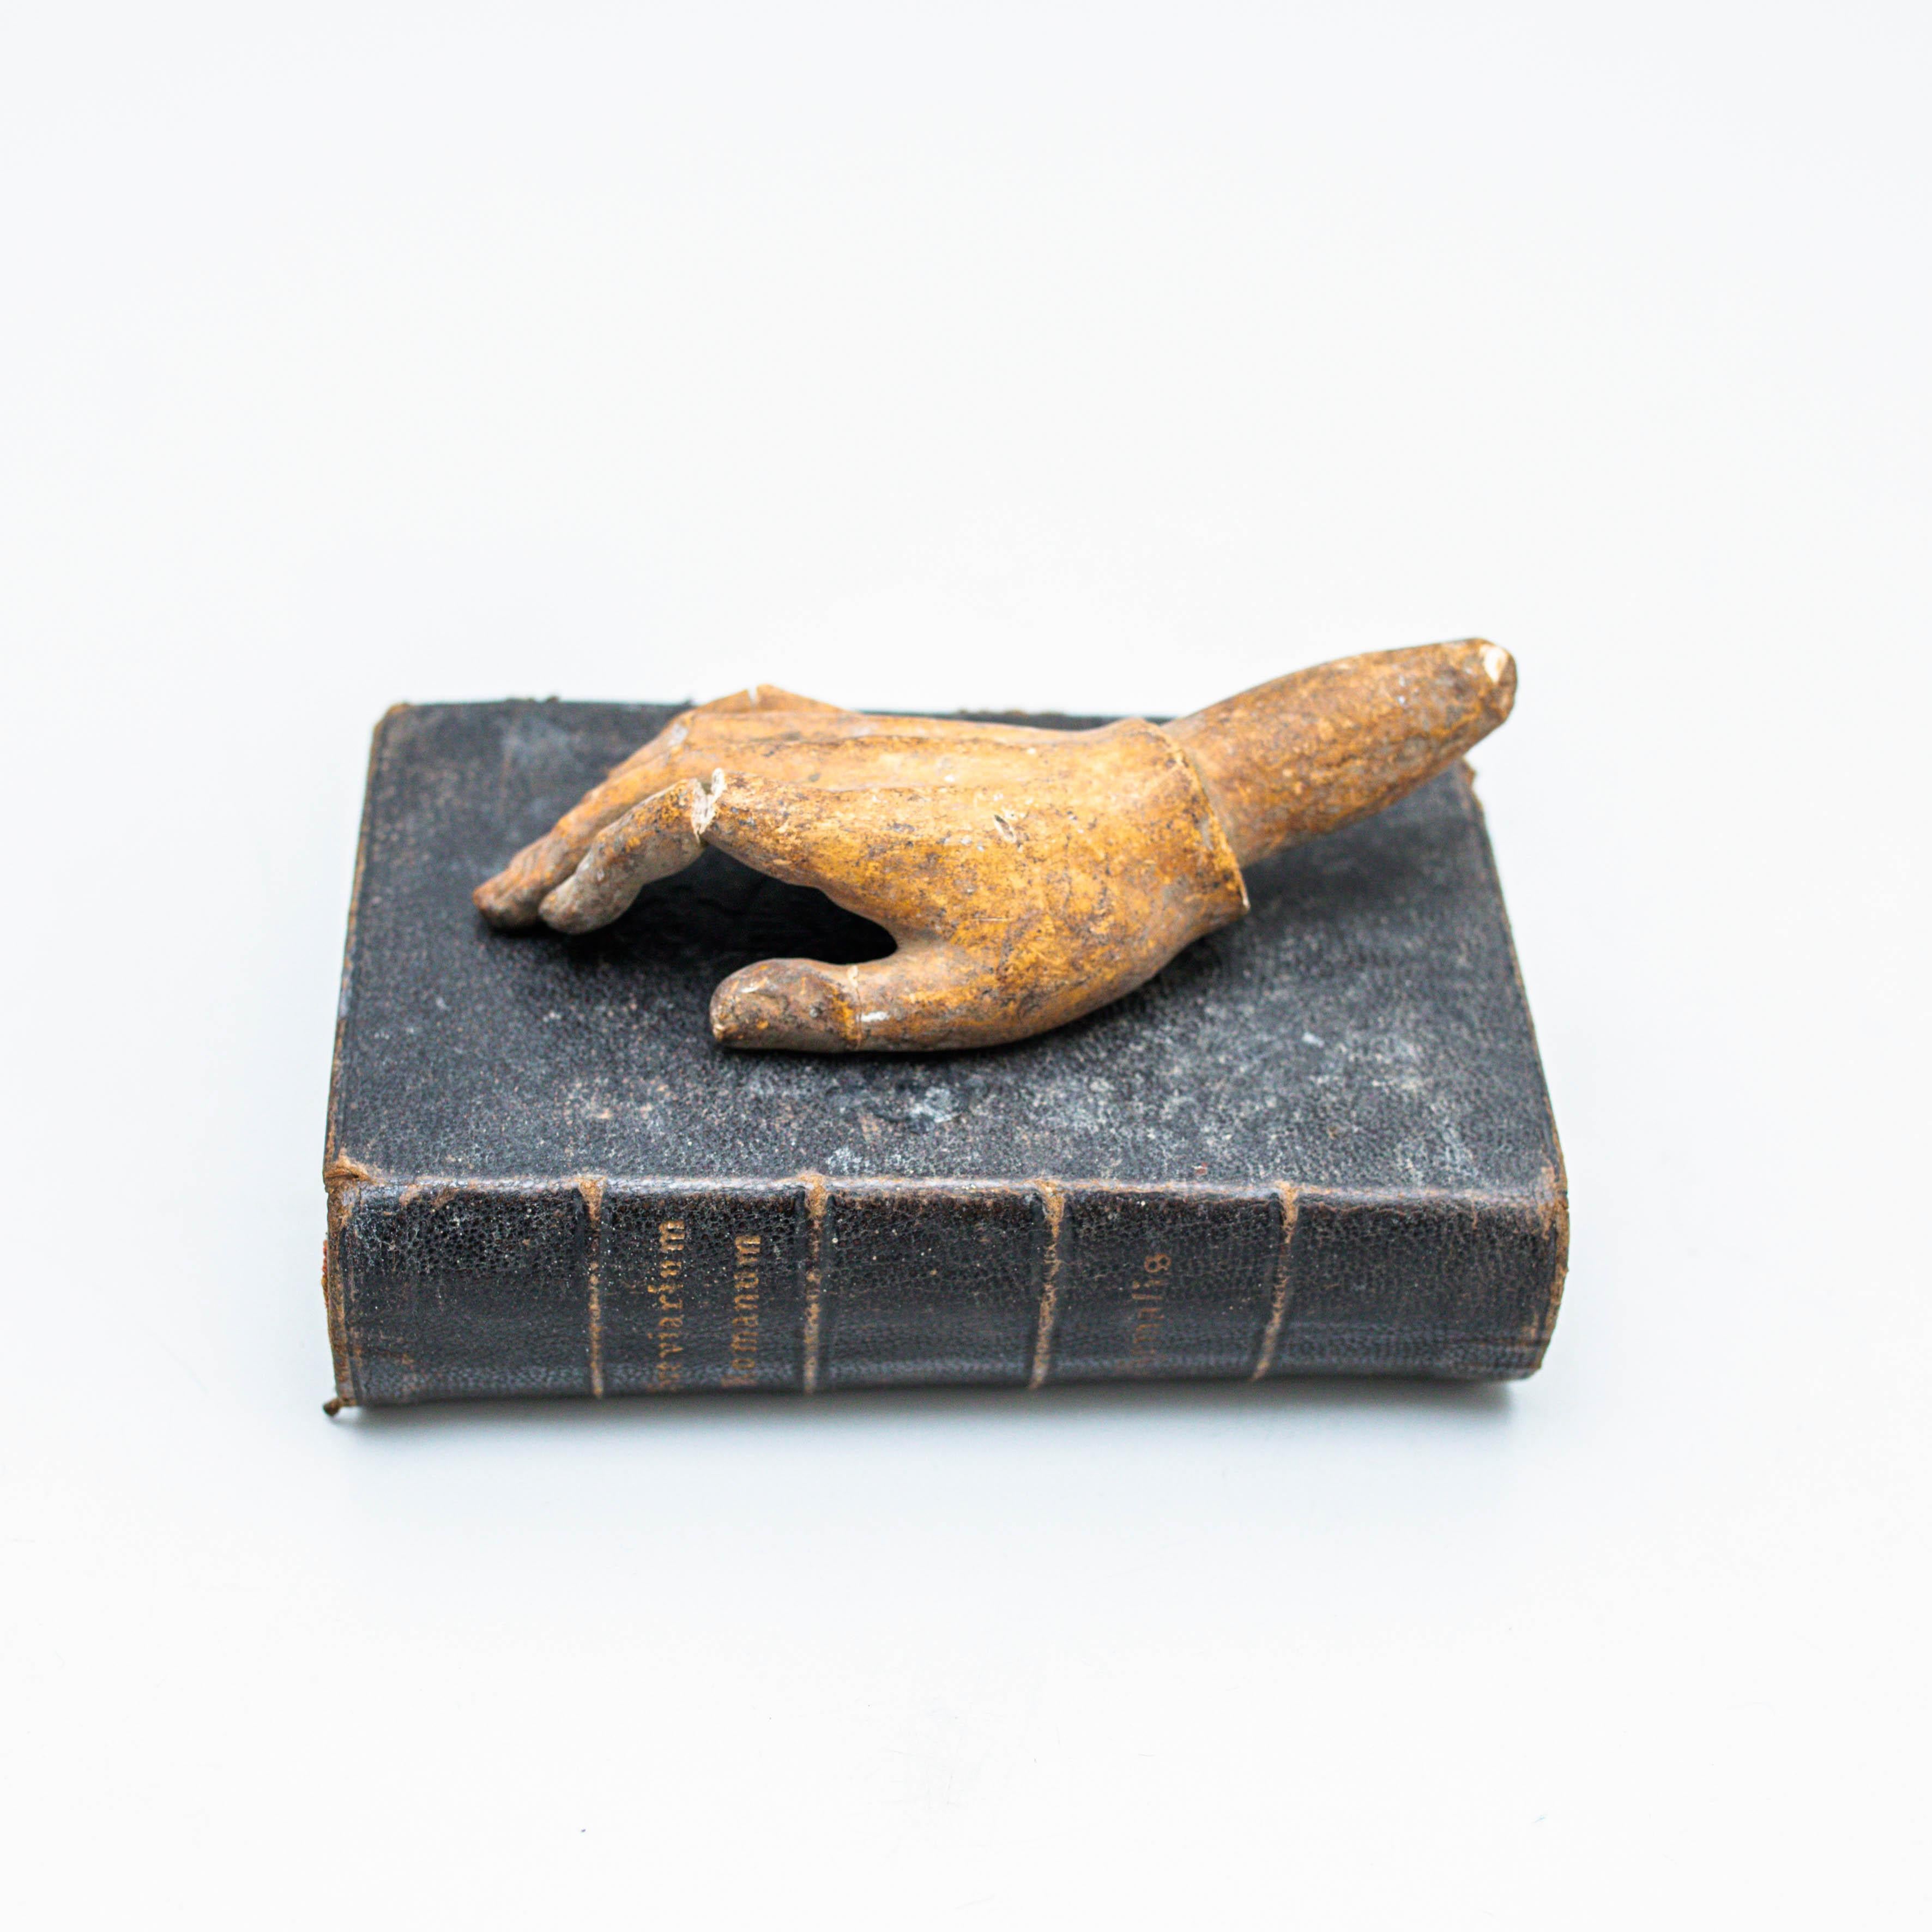 Artwork With Old Book and Mysterious Sculpture Hand, Circa 1990  For Sale 6